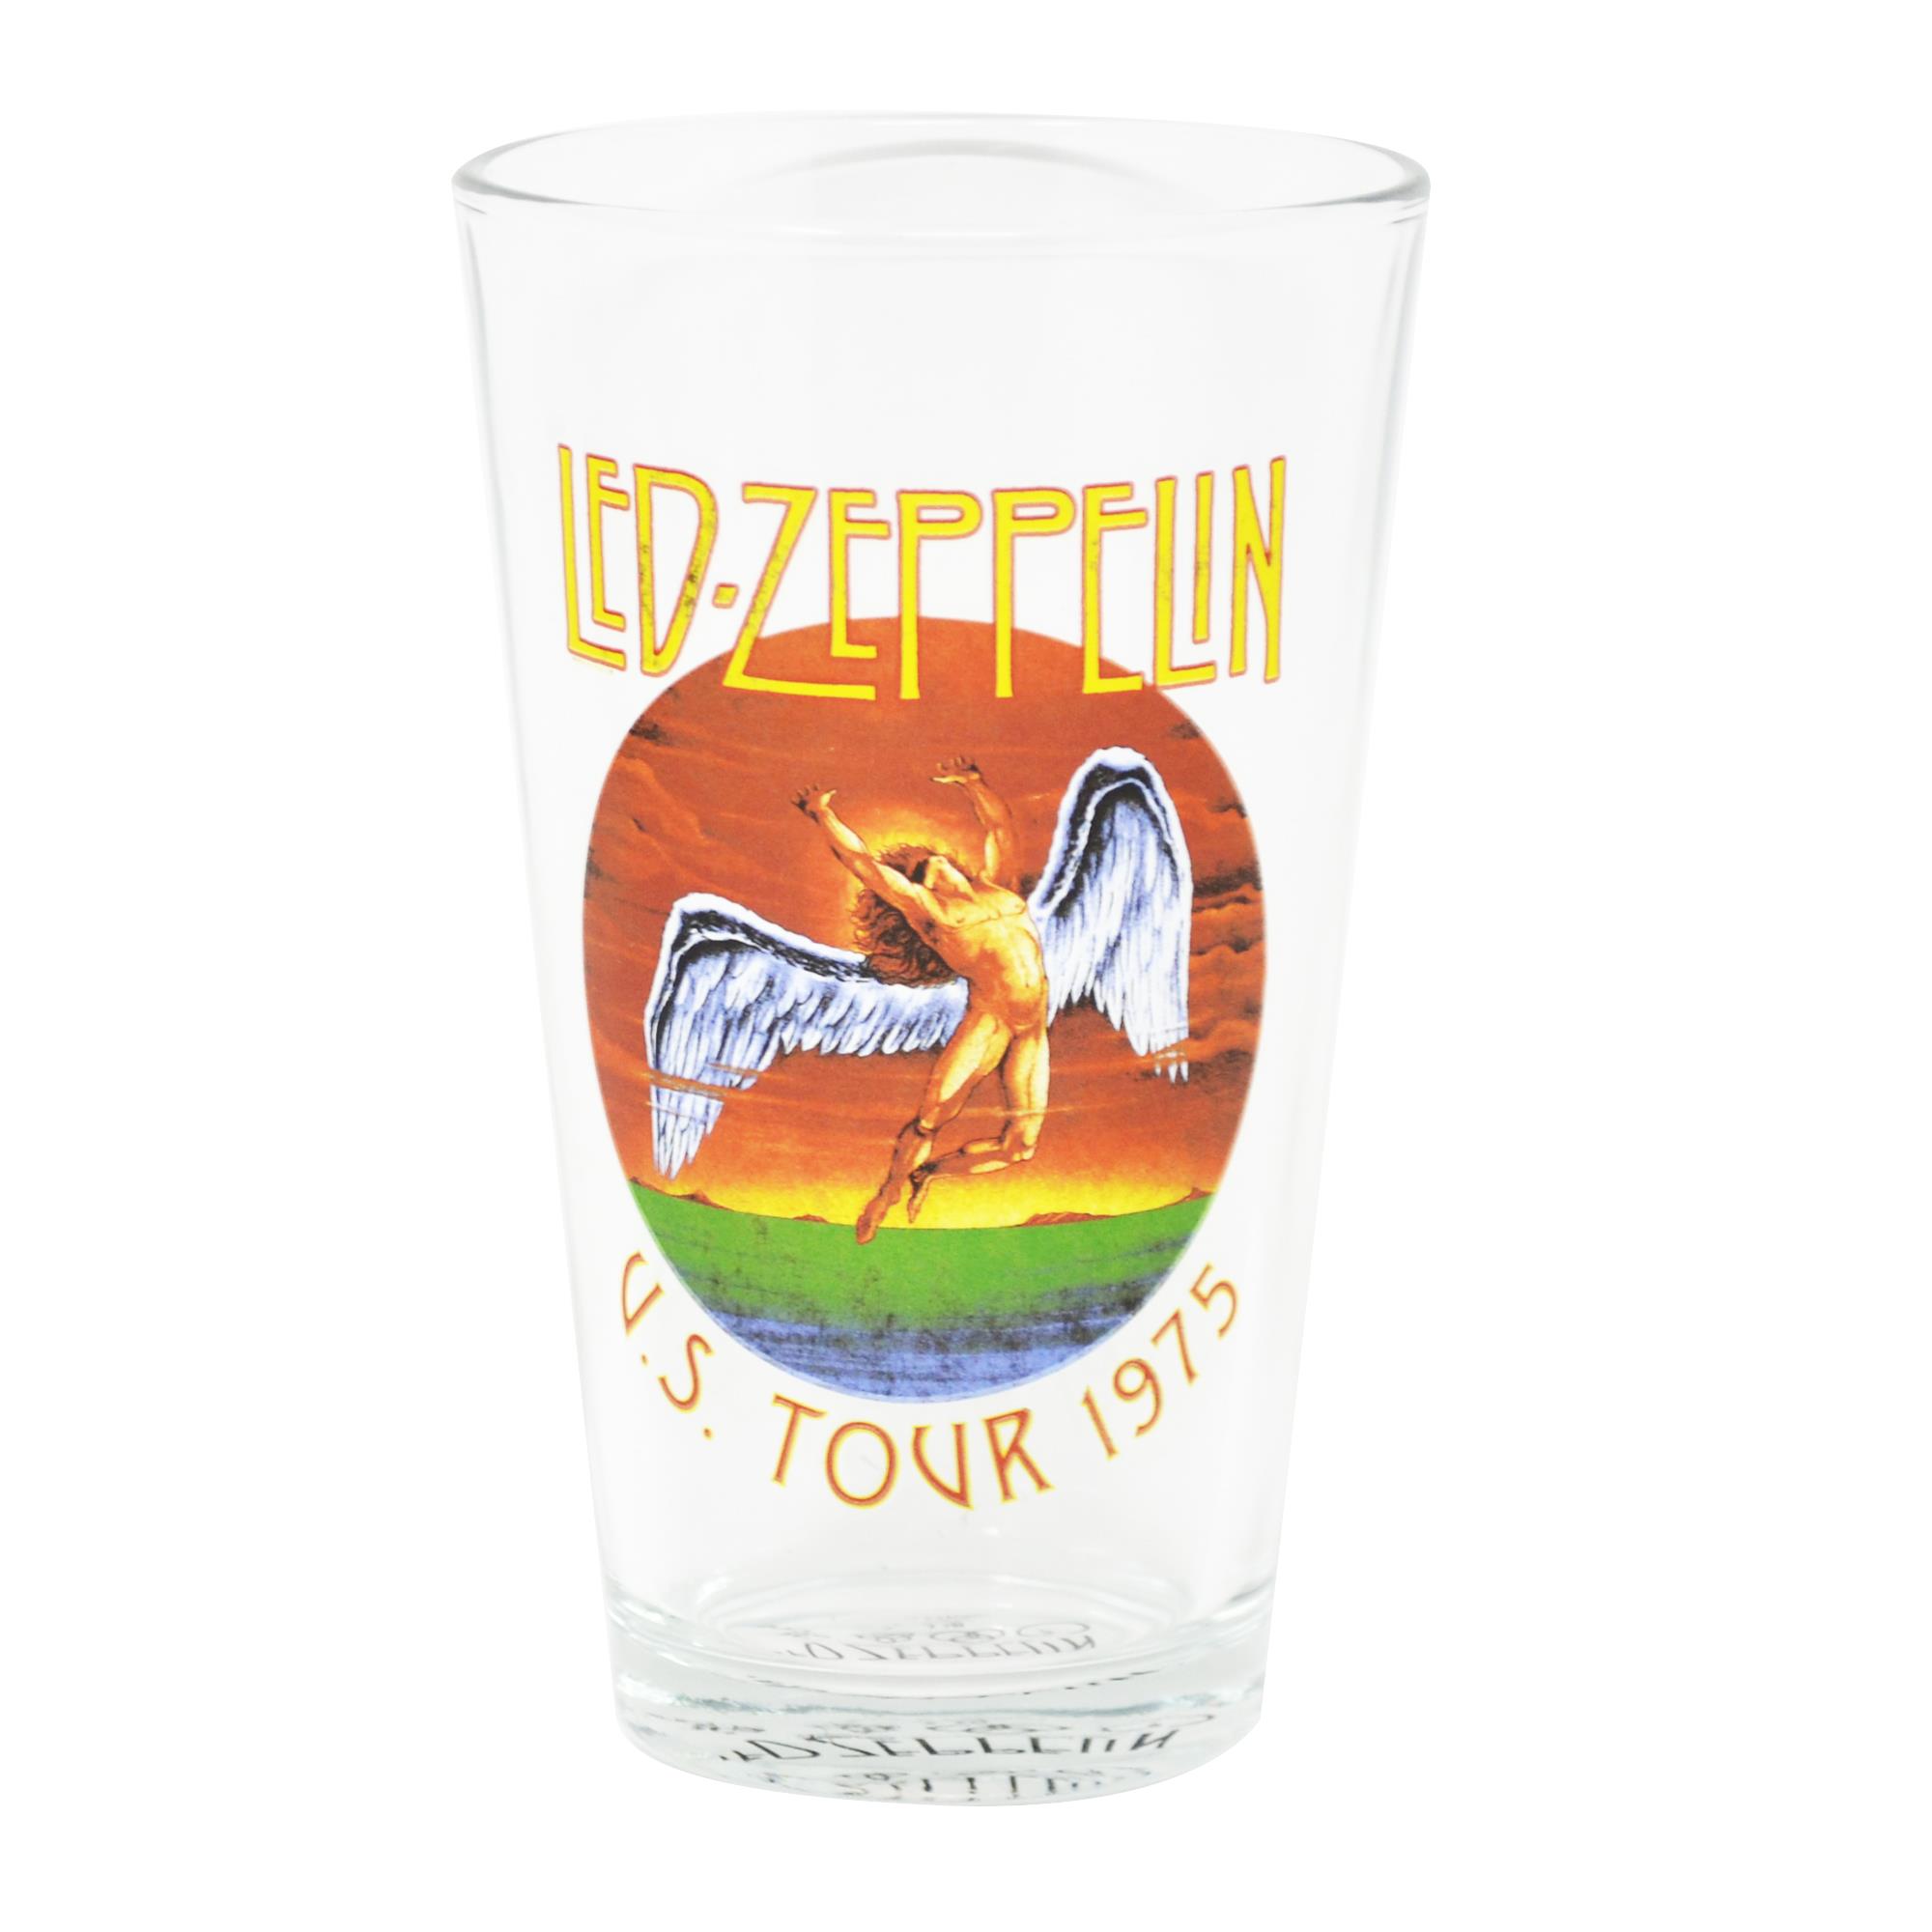 US Tour 1975 Beer Glass